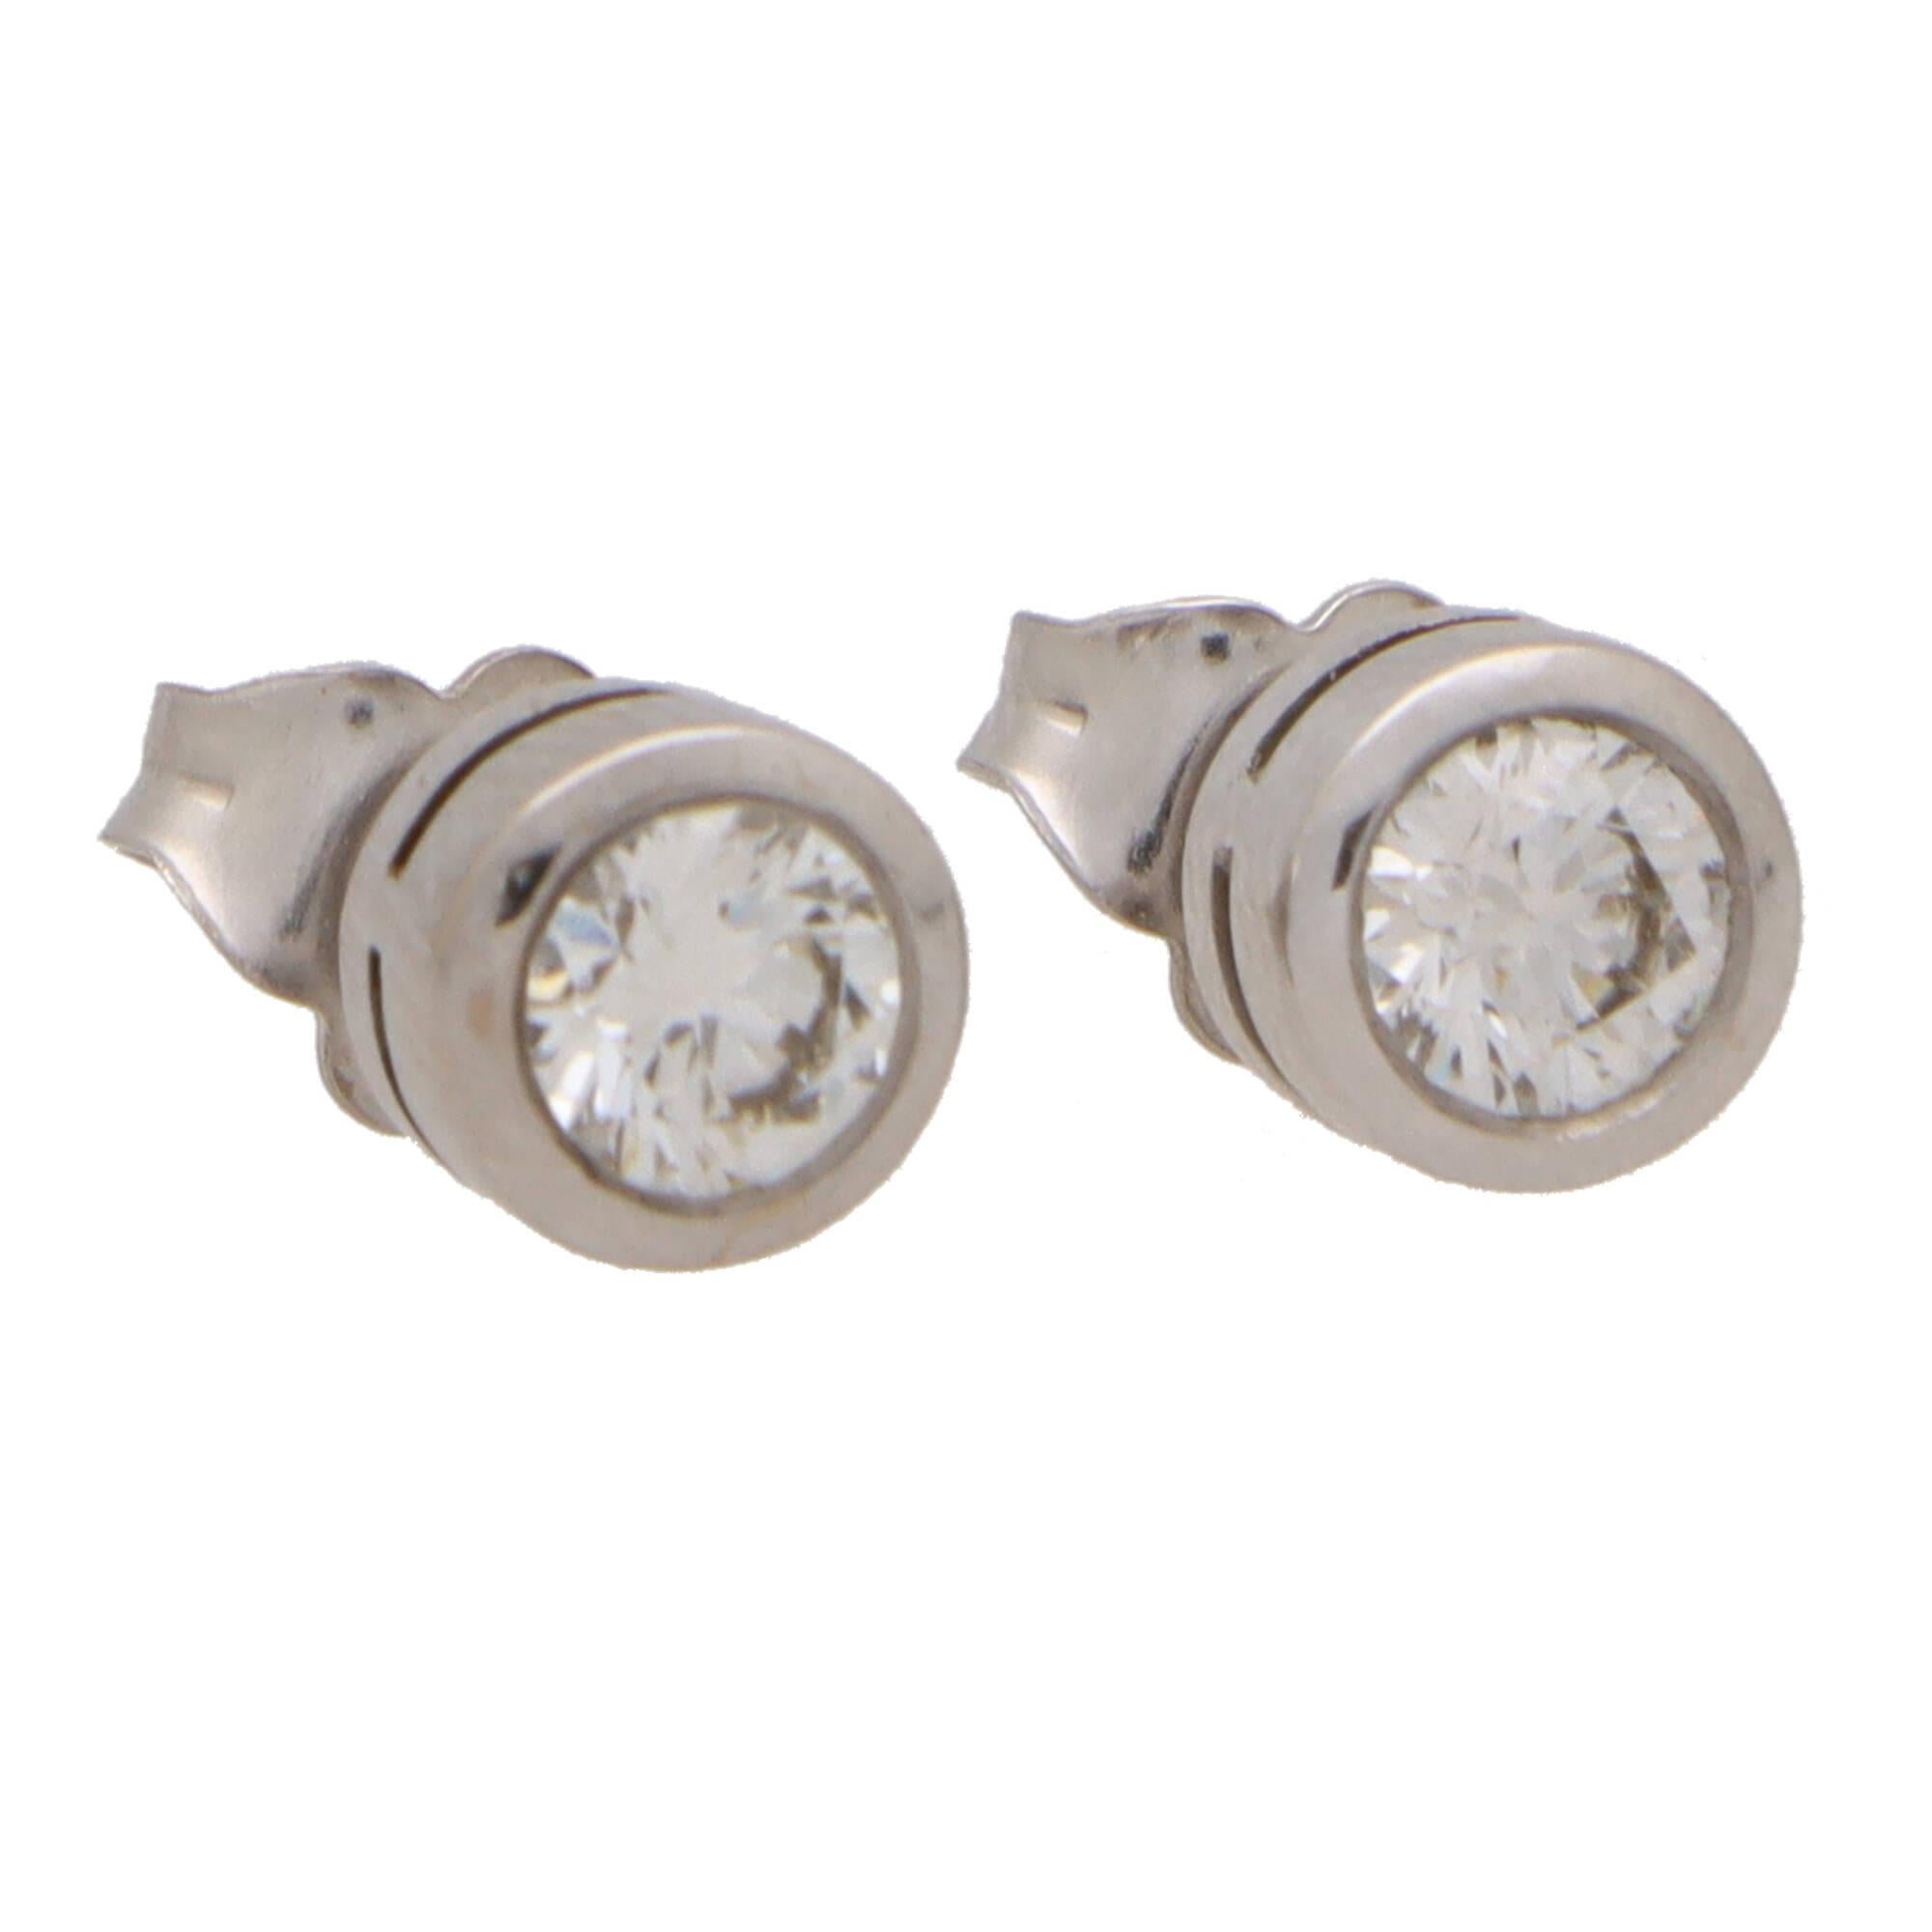  A lovely pair of round brilliant cut diamond stud earrings set in 18k white gold.

Each earring is solely set with a 0.40 carat round brilliant cut diamond which is securely set in a chunky white gold rub over setting. Both earrings are secured to